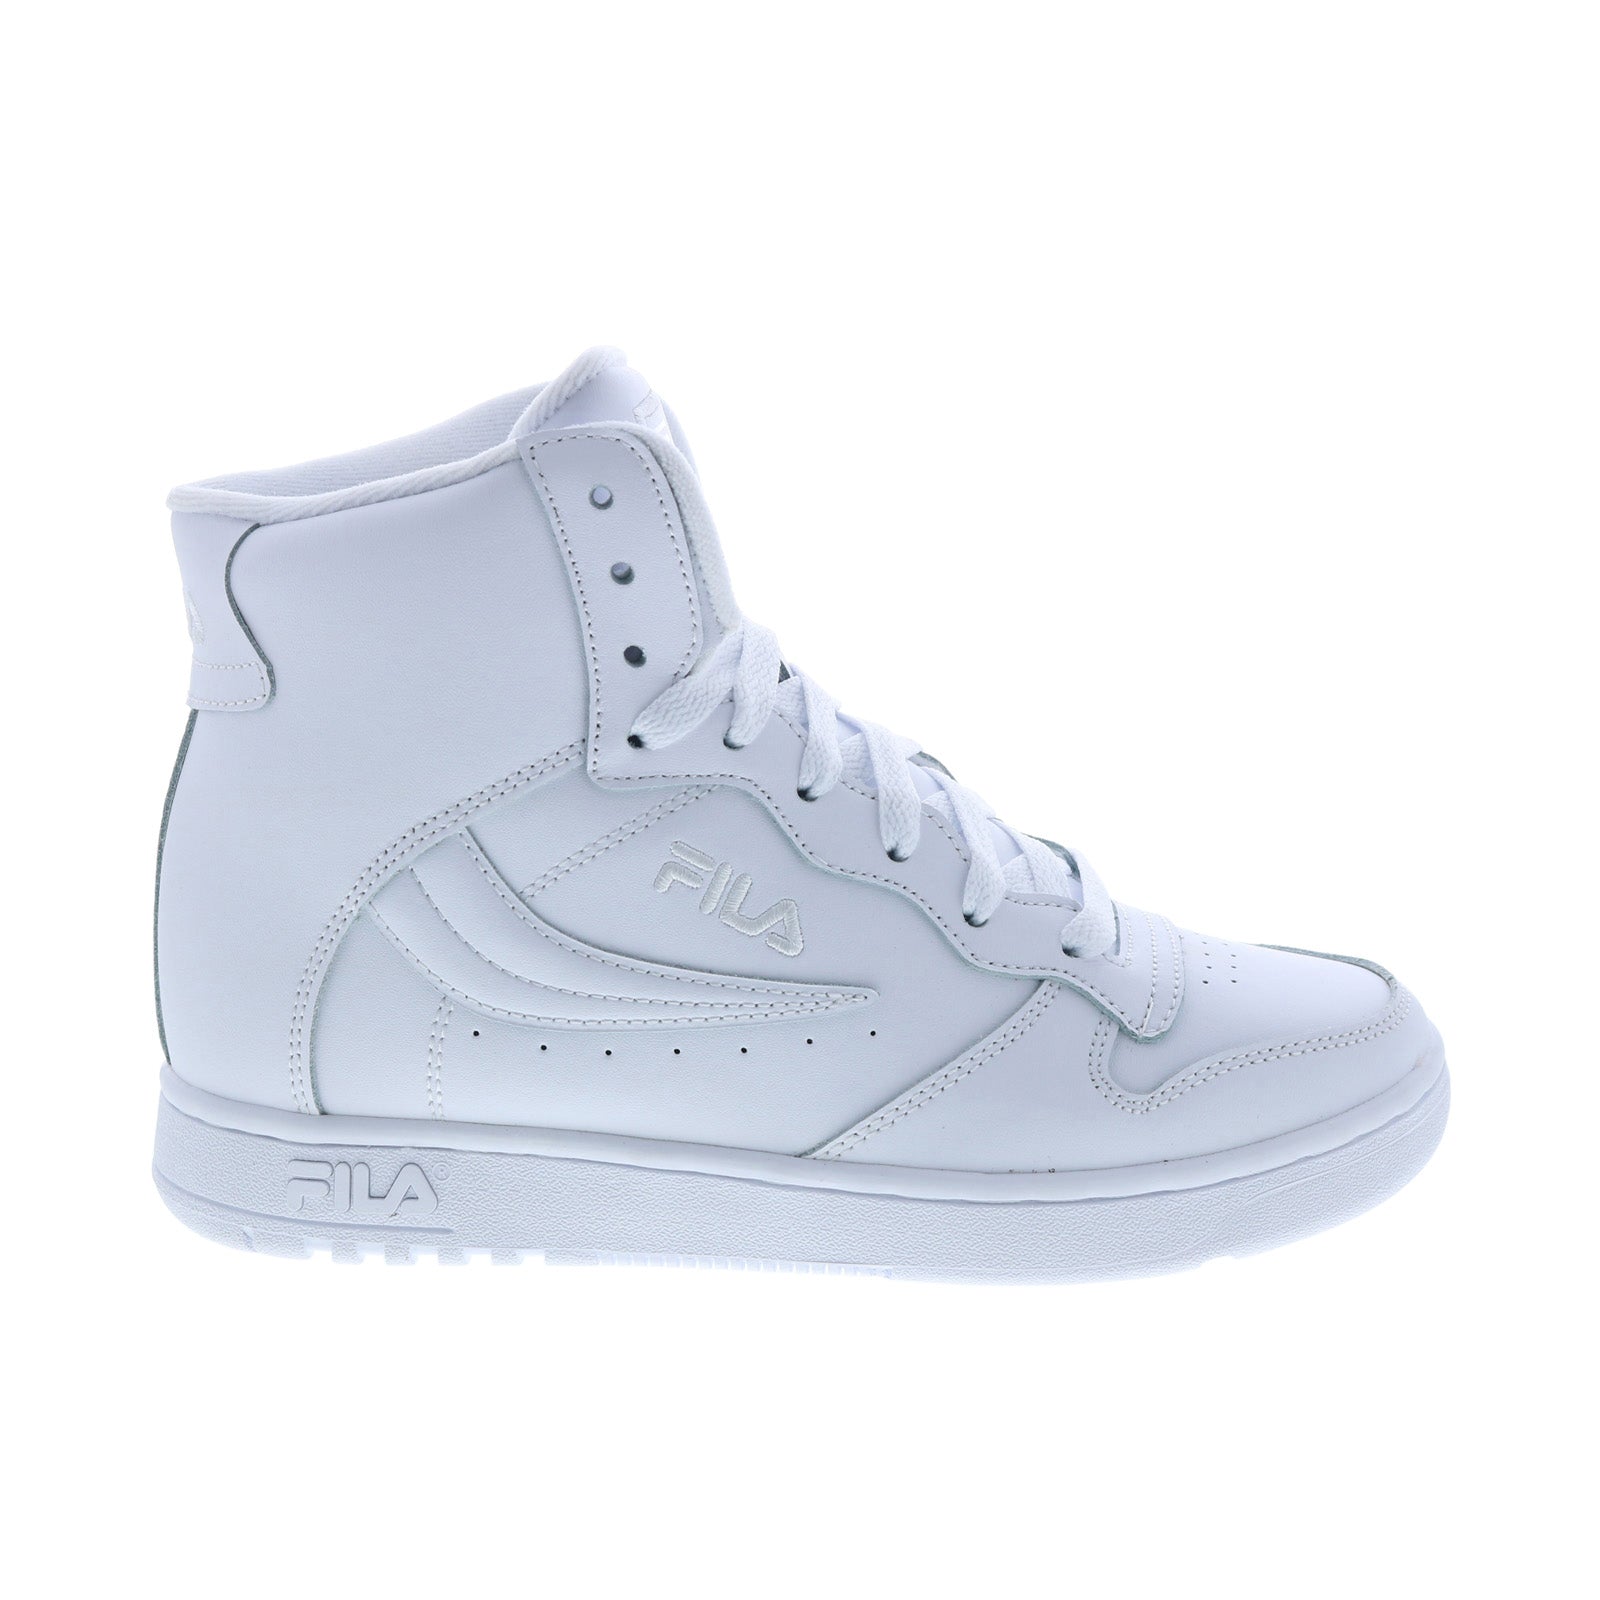 Zinloos Sturen kin Fila WX-120 5CM01310-100 Womens White Leather Lifestyle Sneakers Shoes -  Ruze Shoes